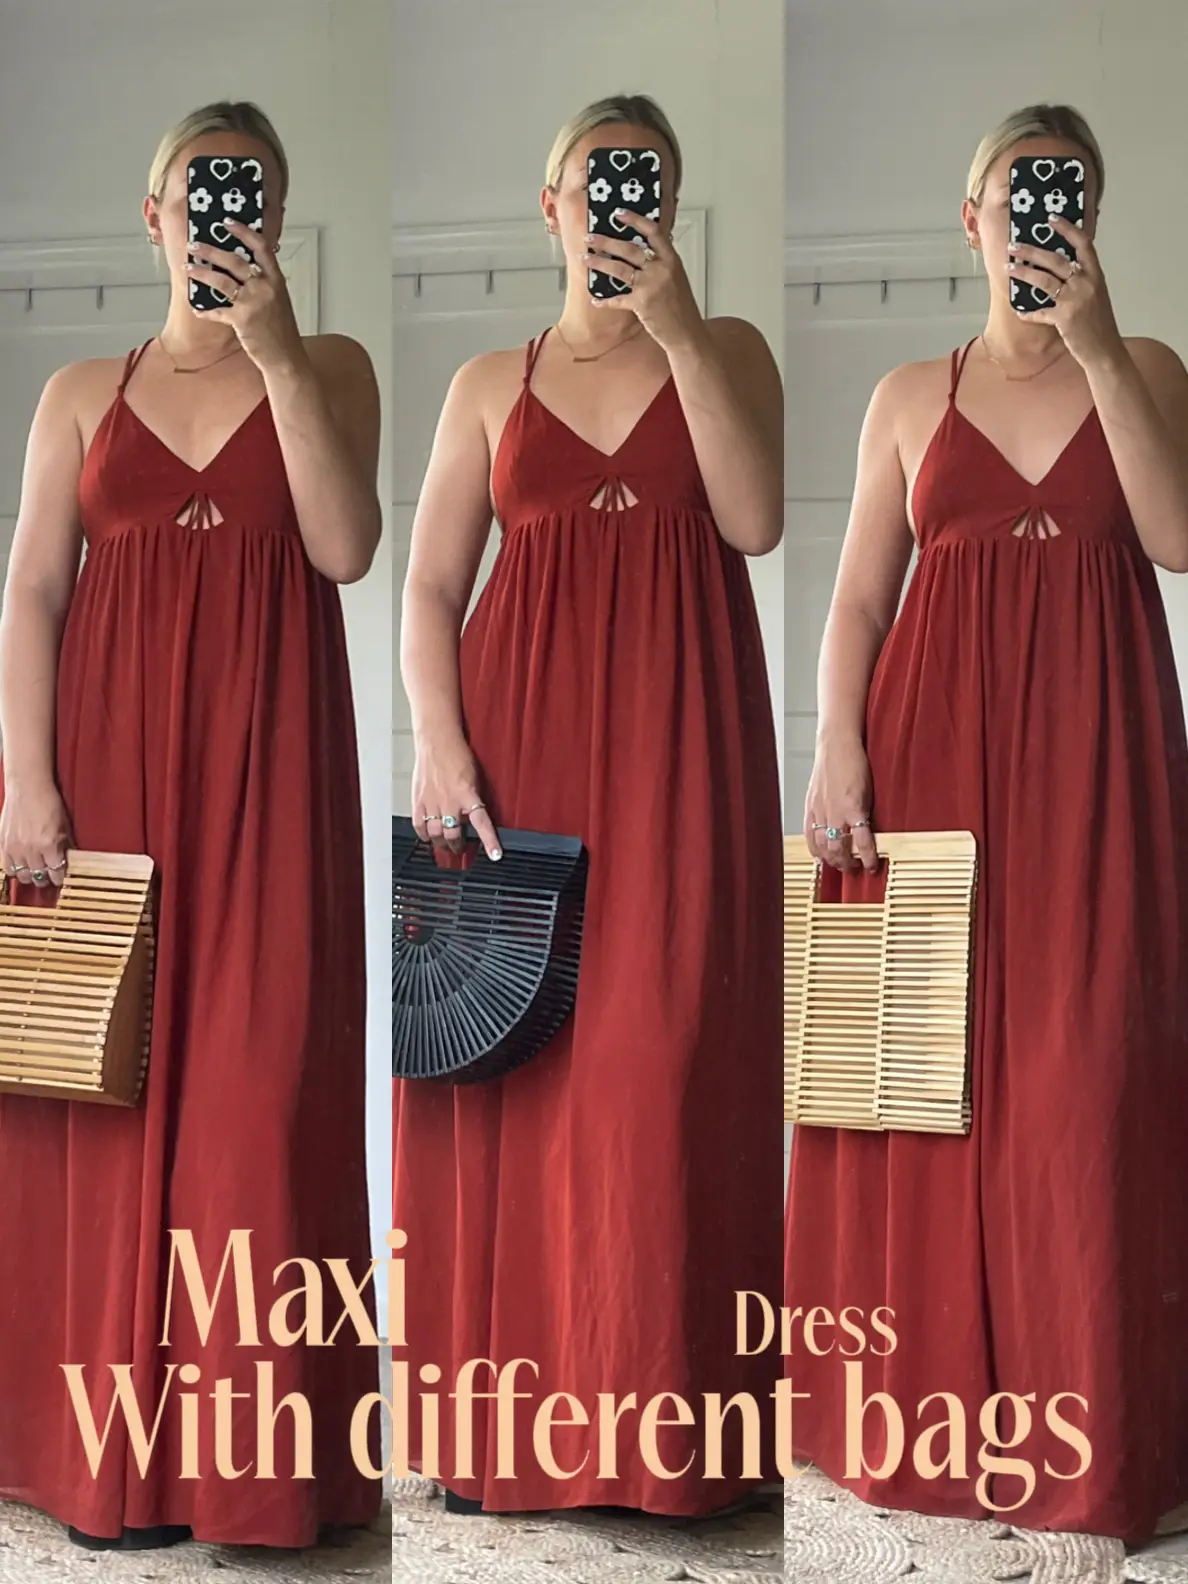 BERSHKA MAXI DRESS - PRODUCT REVIEW ✔️🩷🩰, Gallery posted by Yasmin Dodge